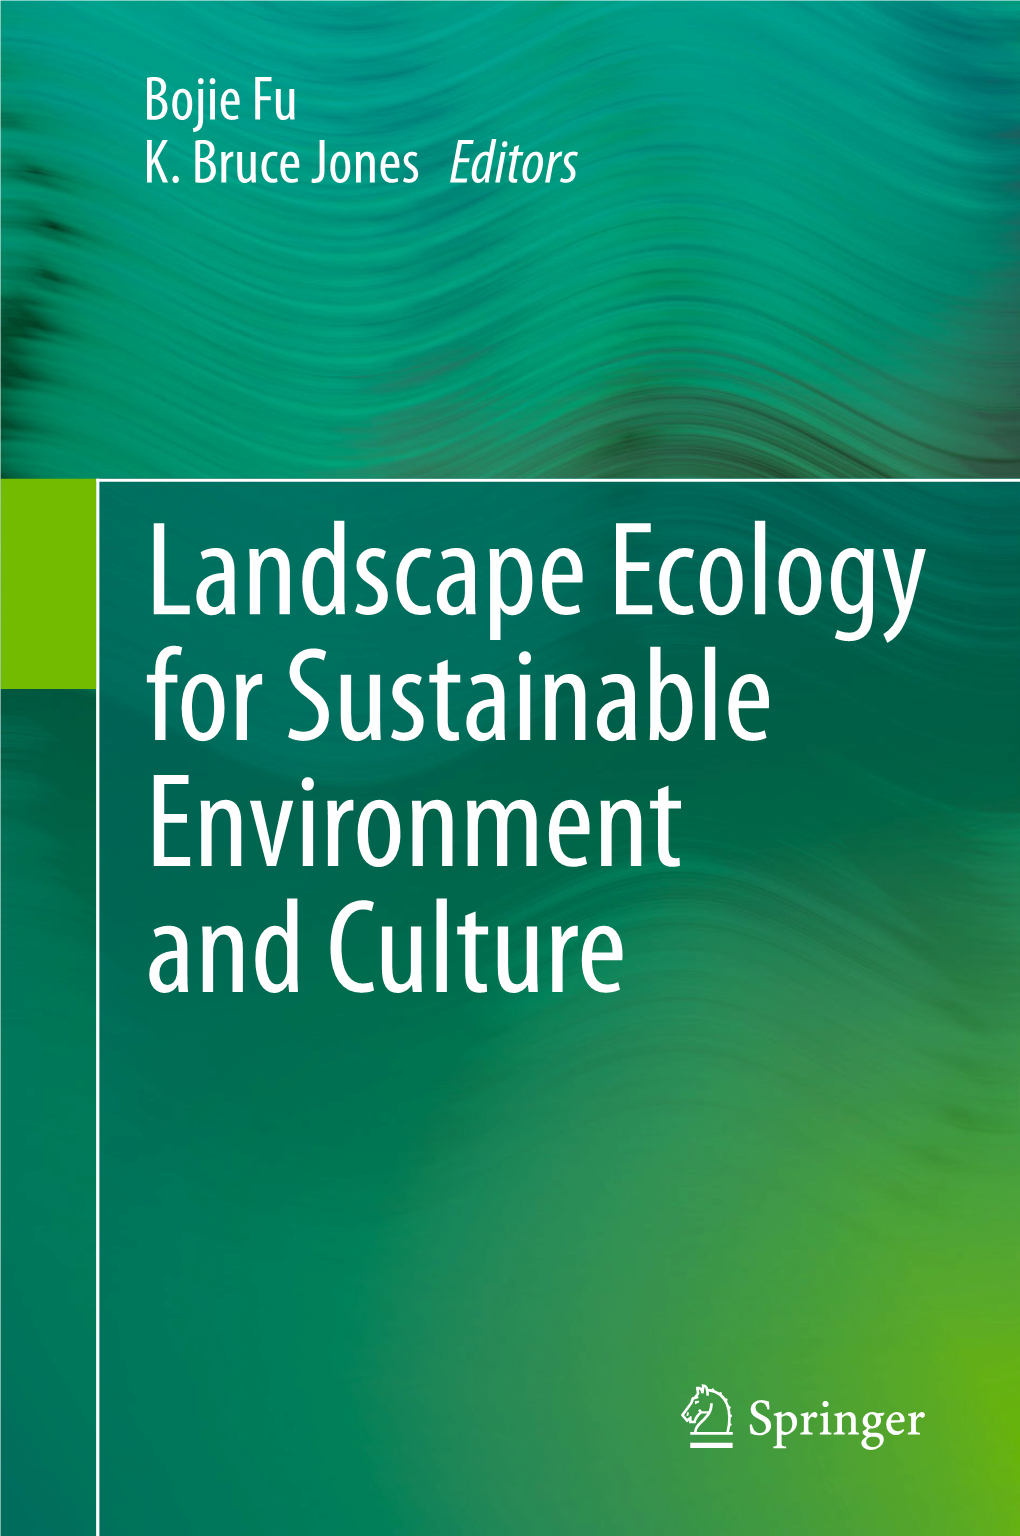 Landscape Ecology for Sustainable Environment and Culture Landscape Ecology for Sustainable Environment and Culture Bojie Fu • K